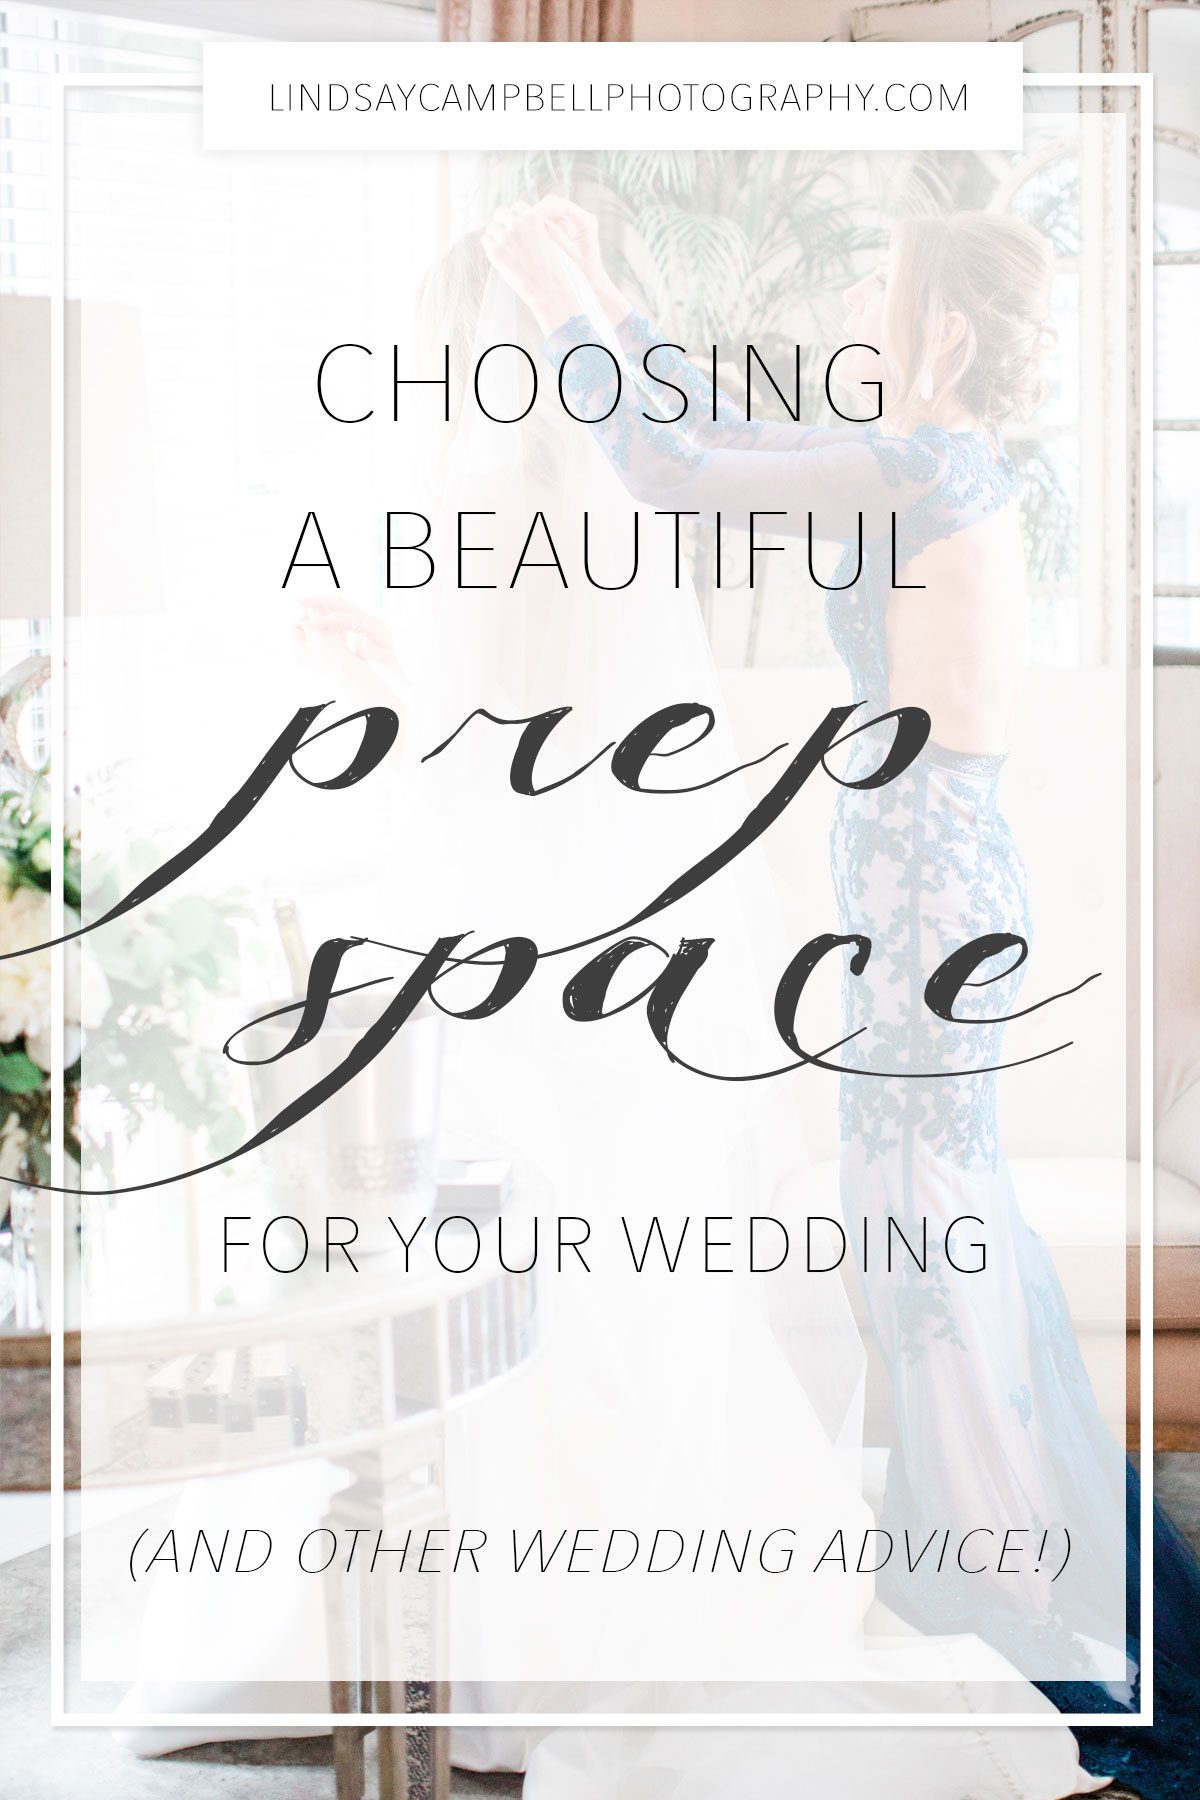 prep-space Why Your Prep Space is So Important